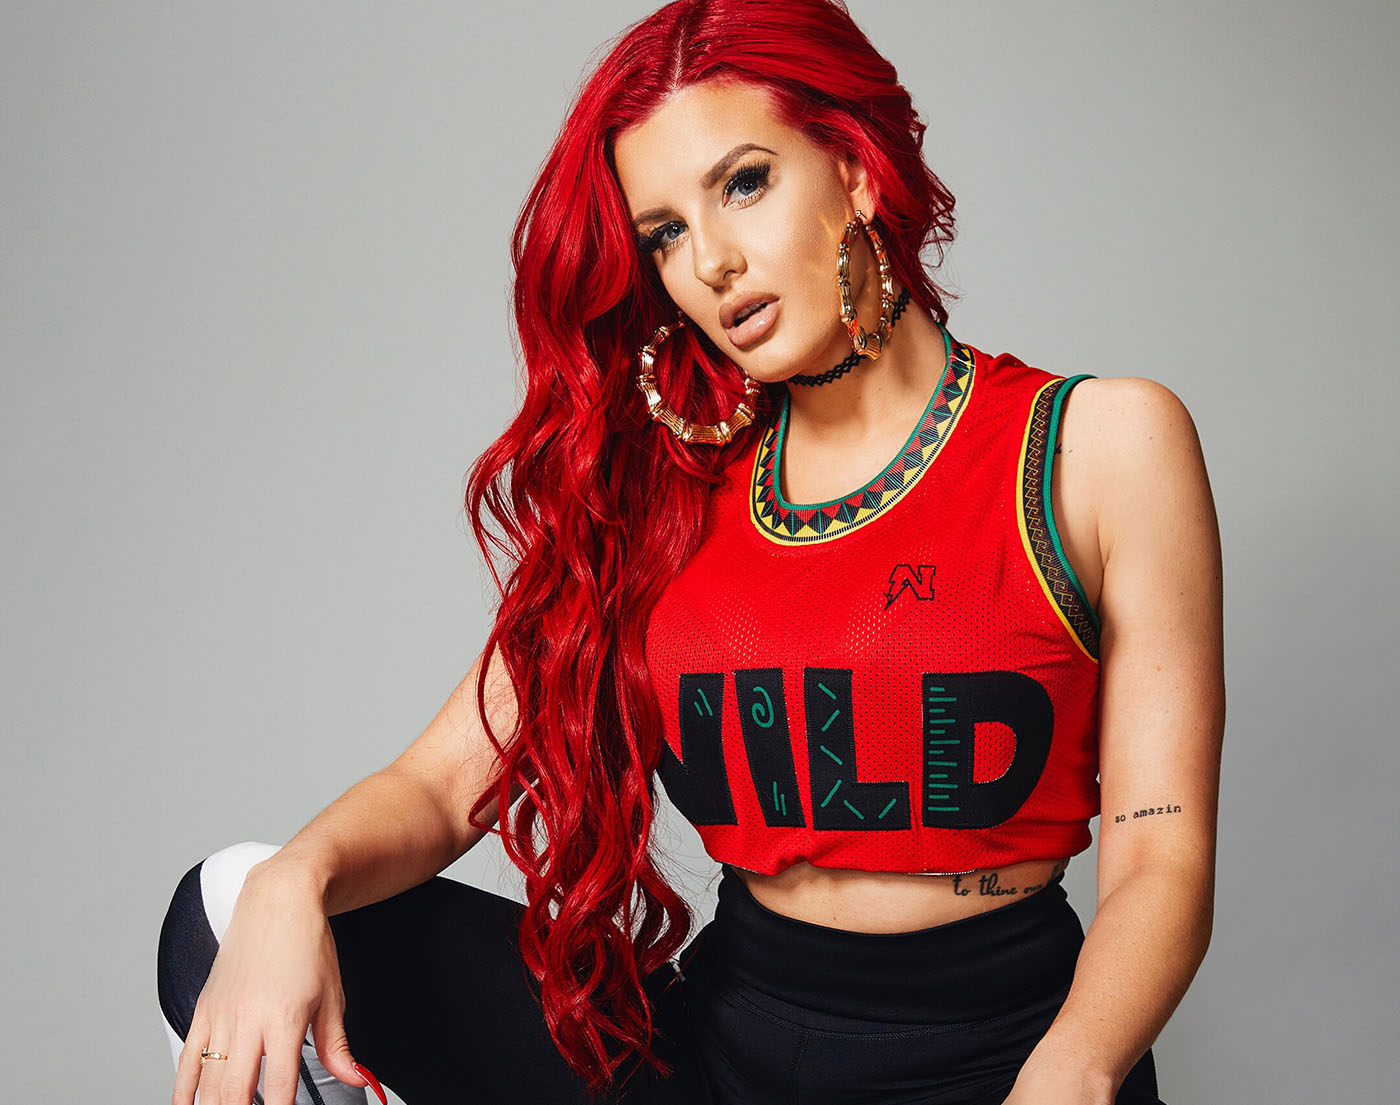 Jersey Singer Justina Valentine Kills It With Her New Single.